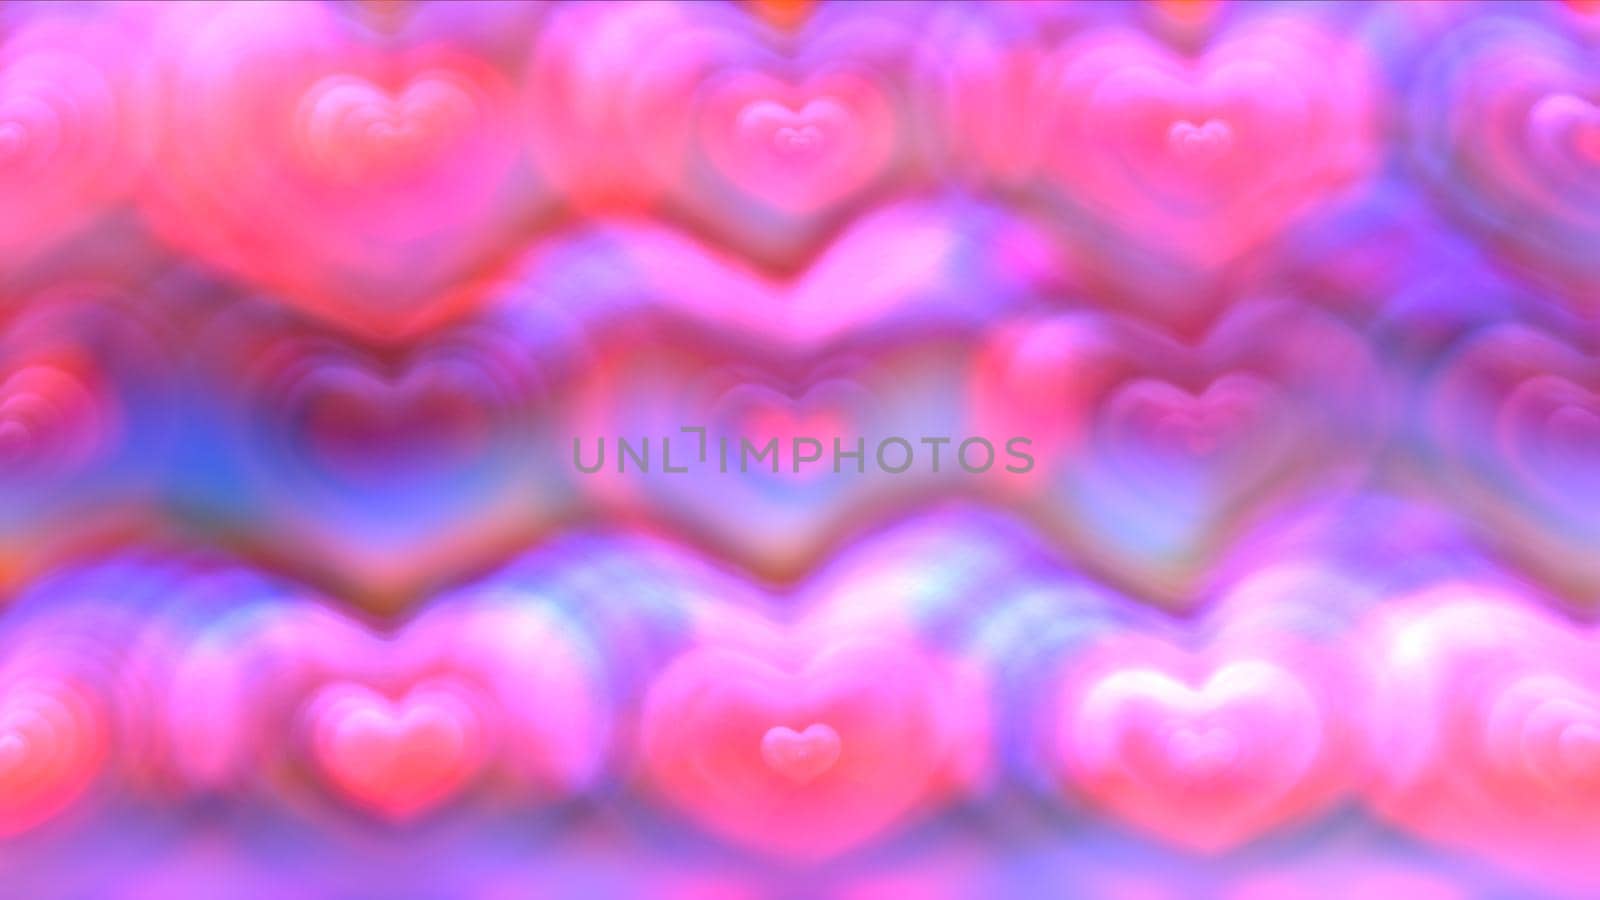 Colorful light abstract hearts background illustration render